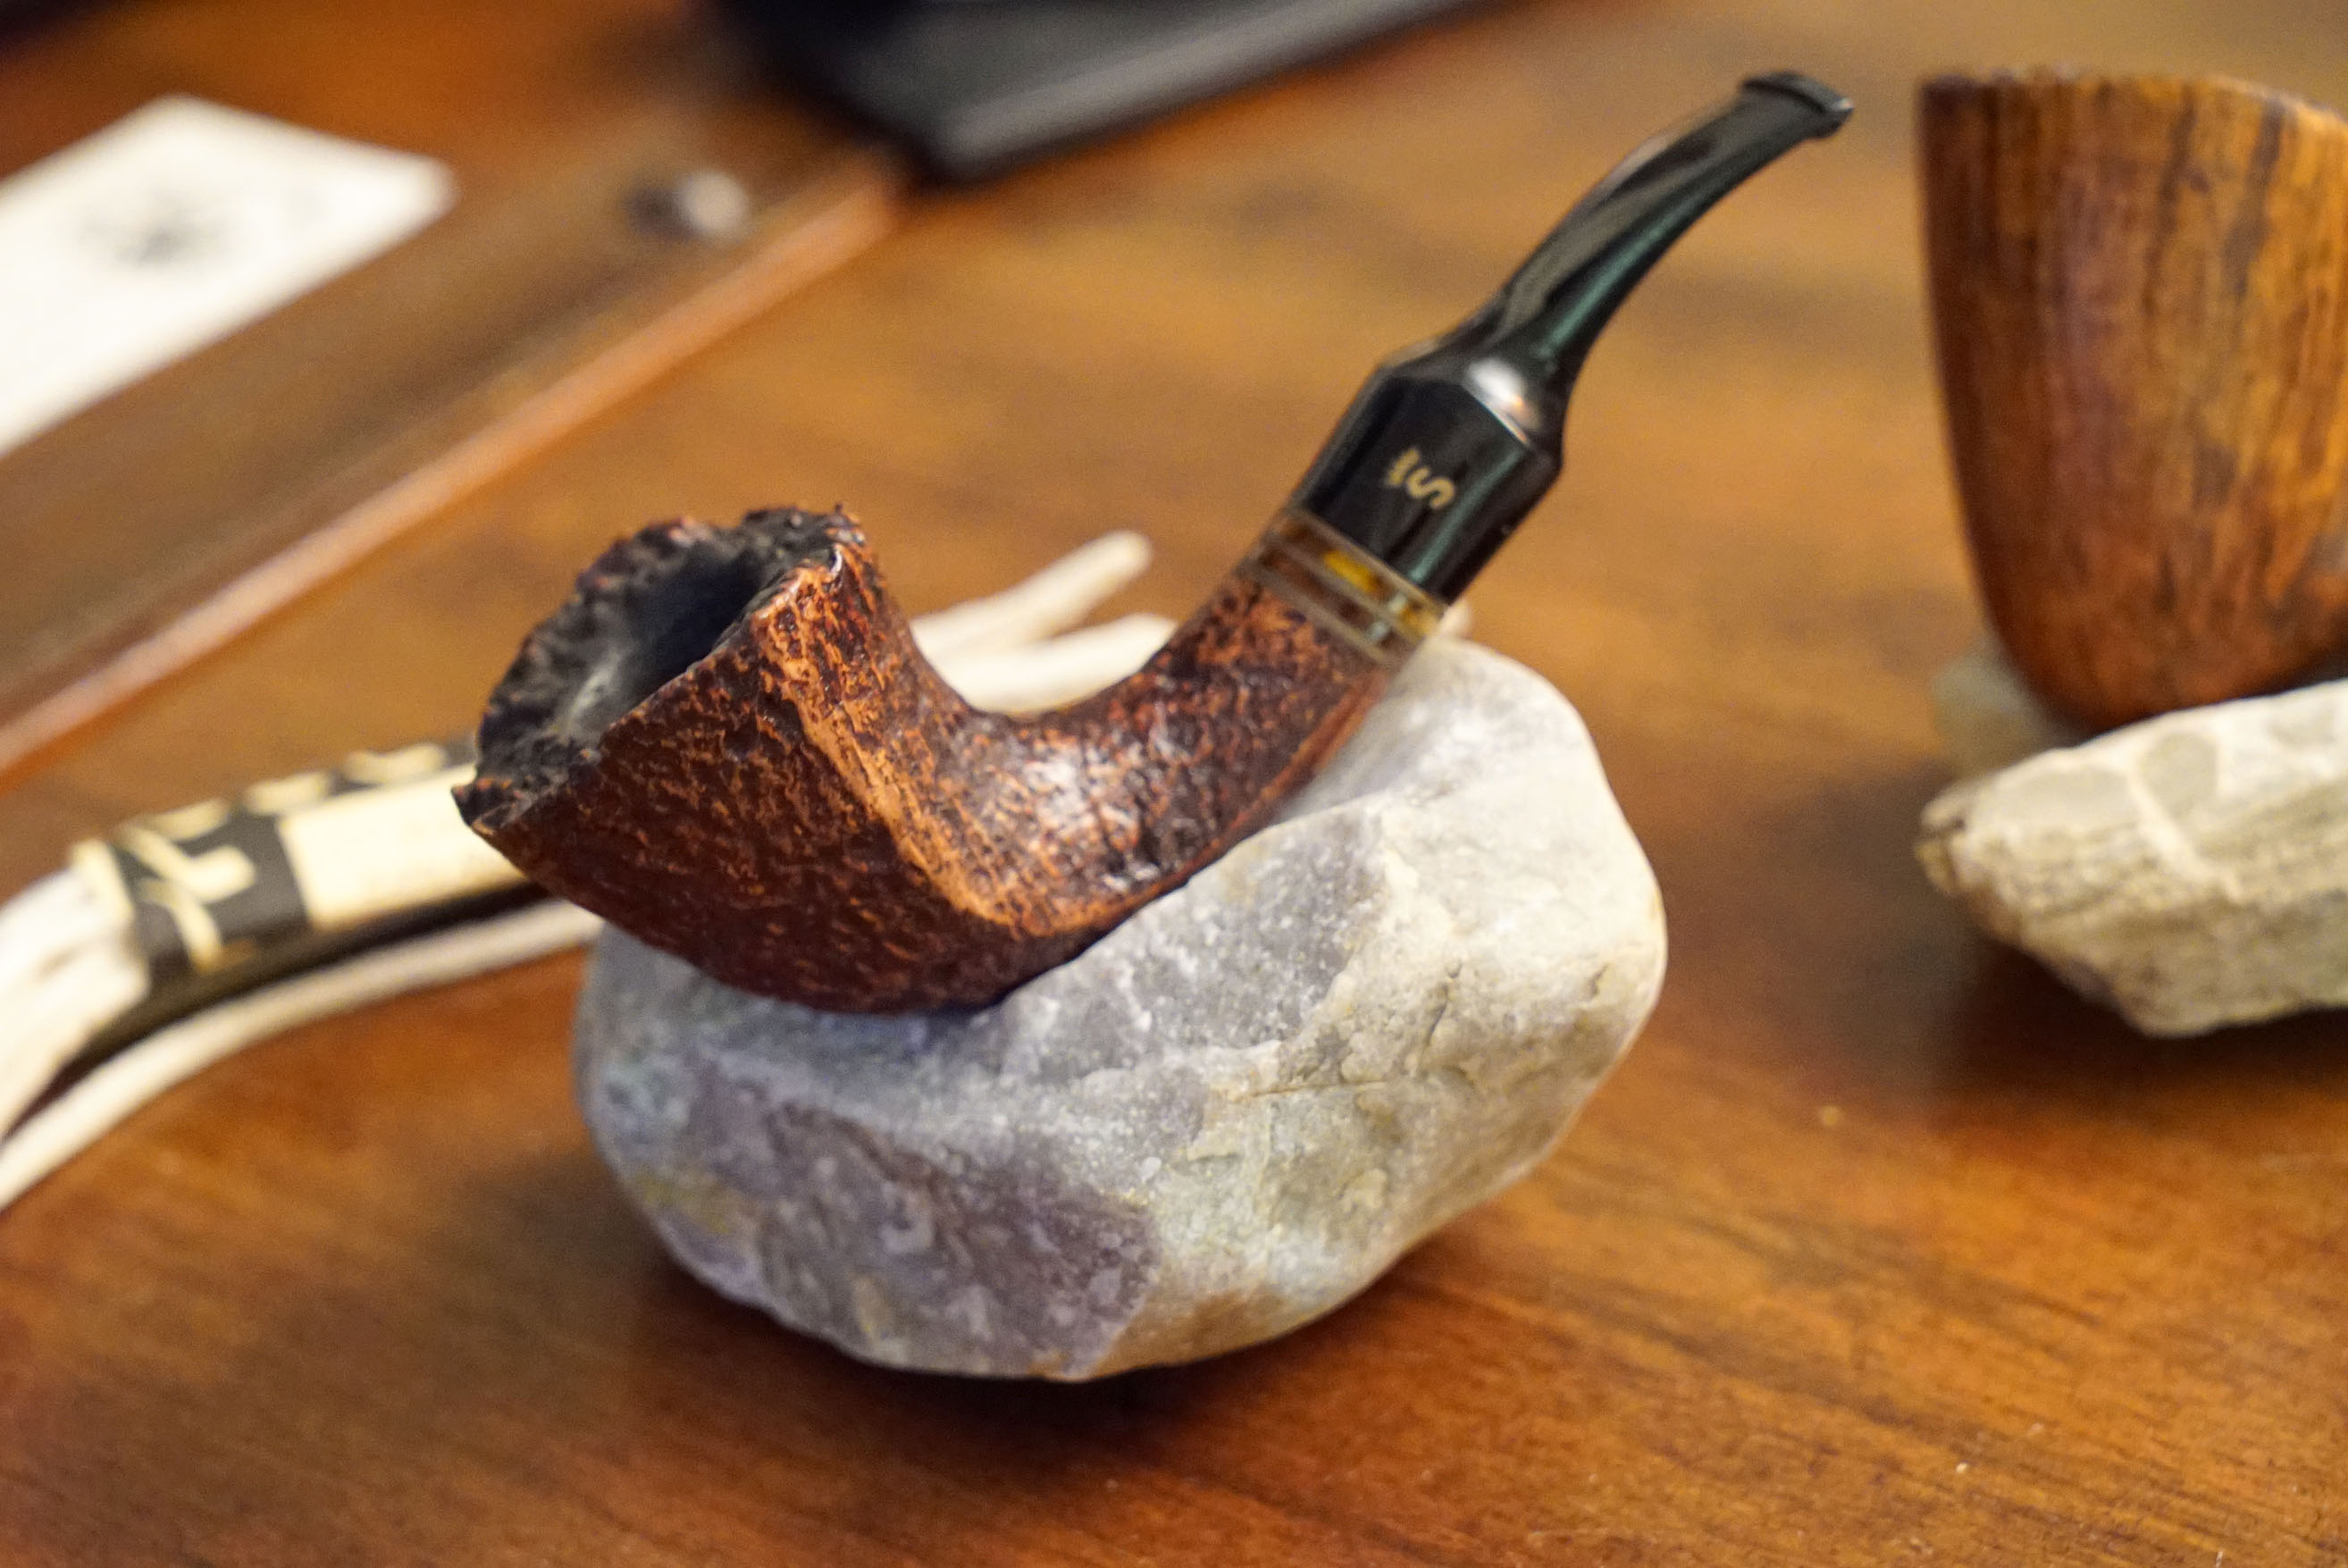 Smoking Pipes Wallpaper Full Hd - Popping Pipe Tobacco , HD Wallpaper & Backgrounds